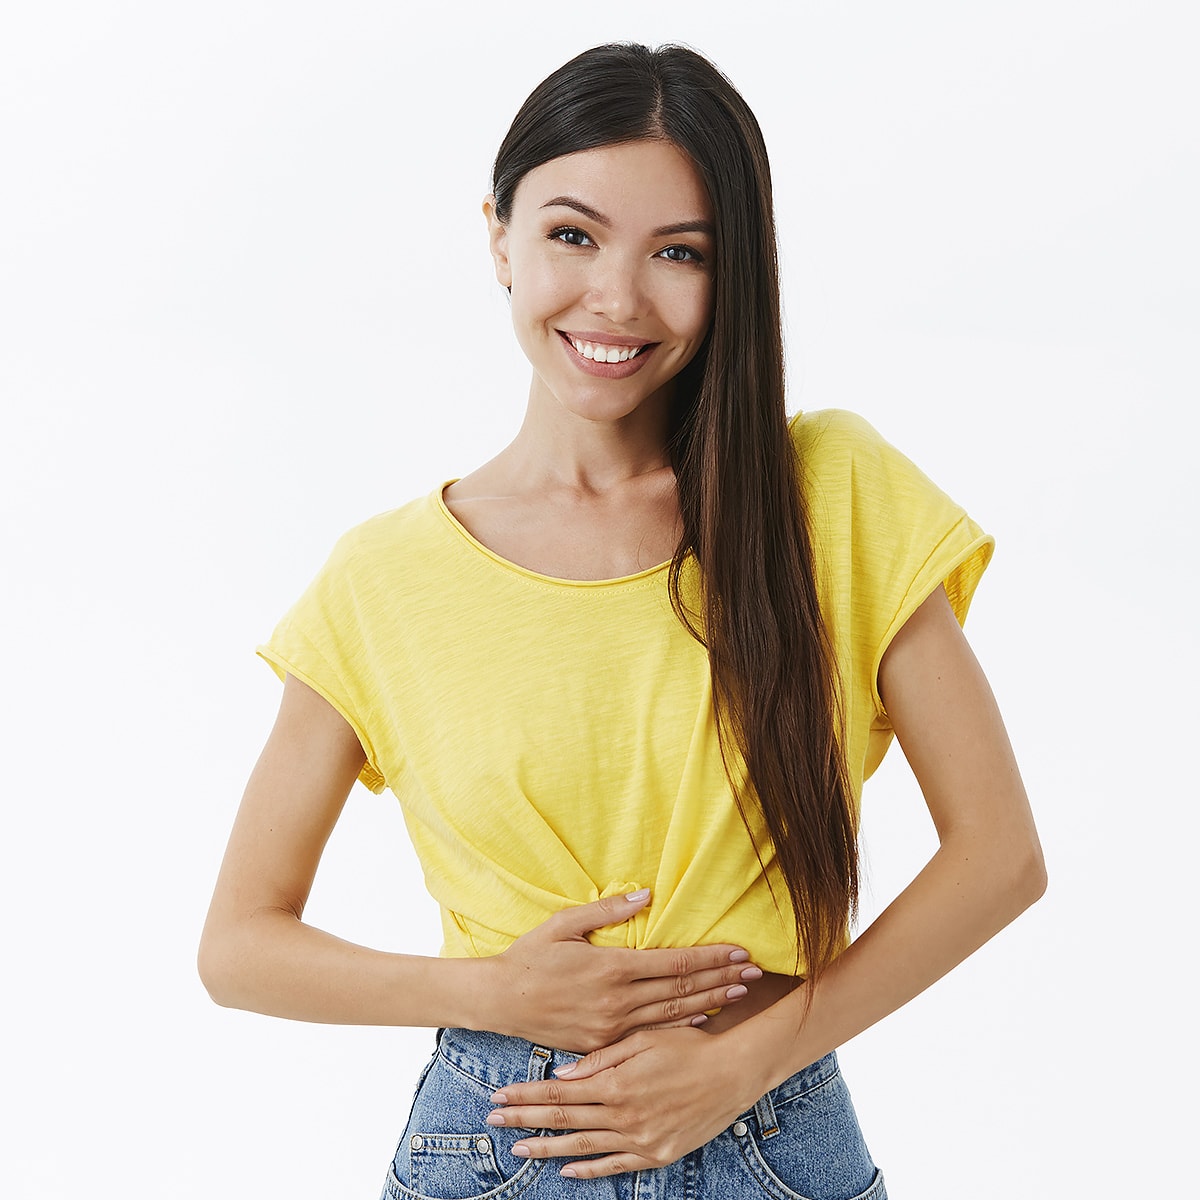 A cheerful girl in a yellow t-shirt holding her stomach.